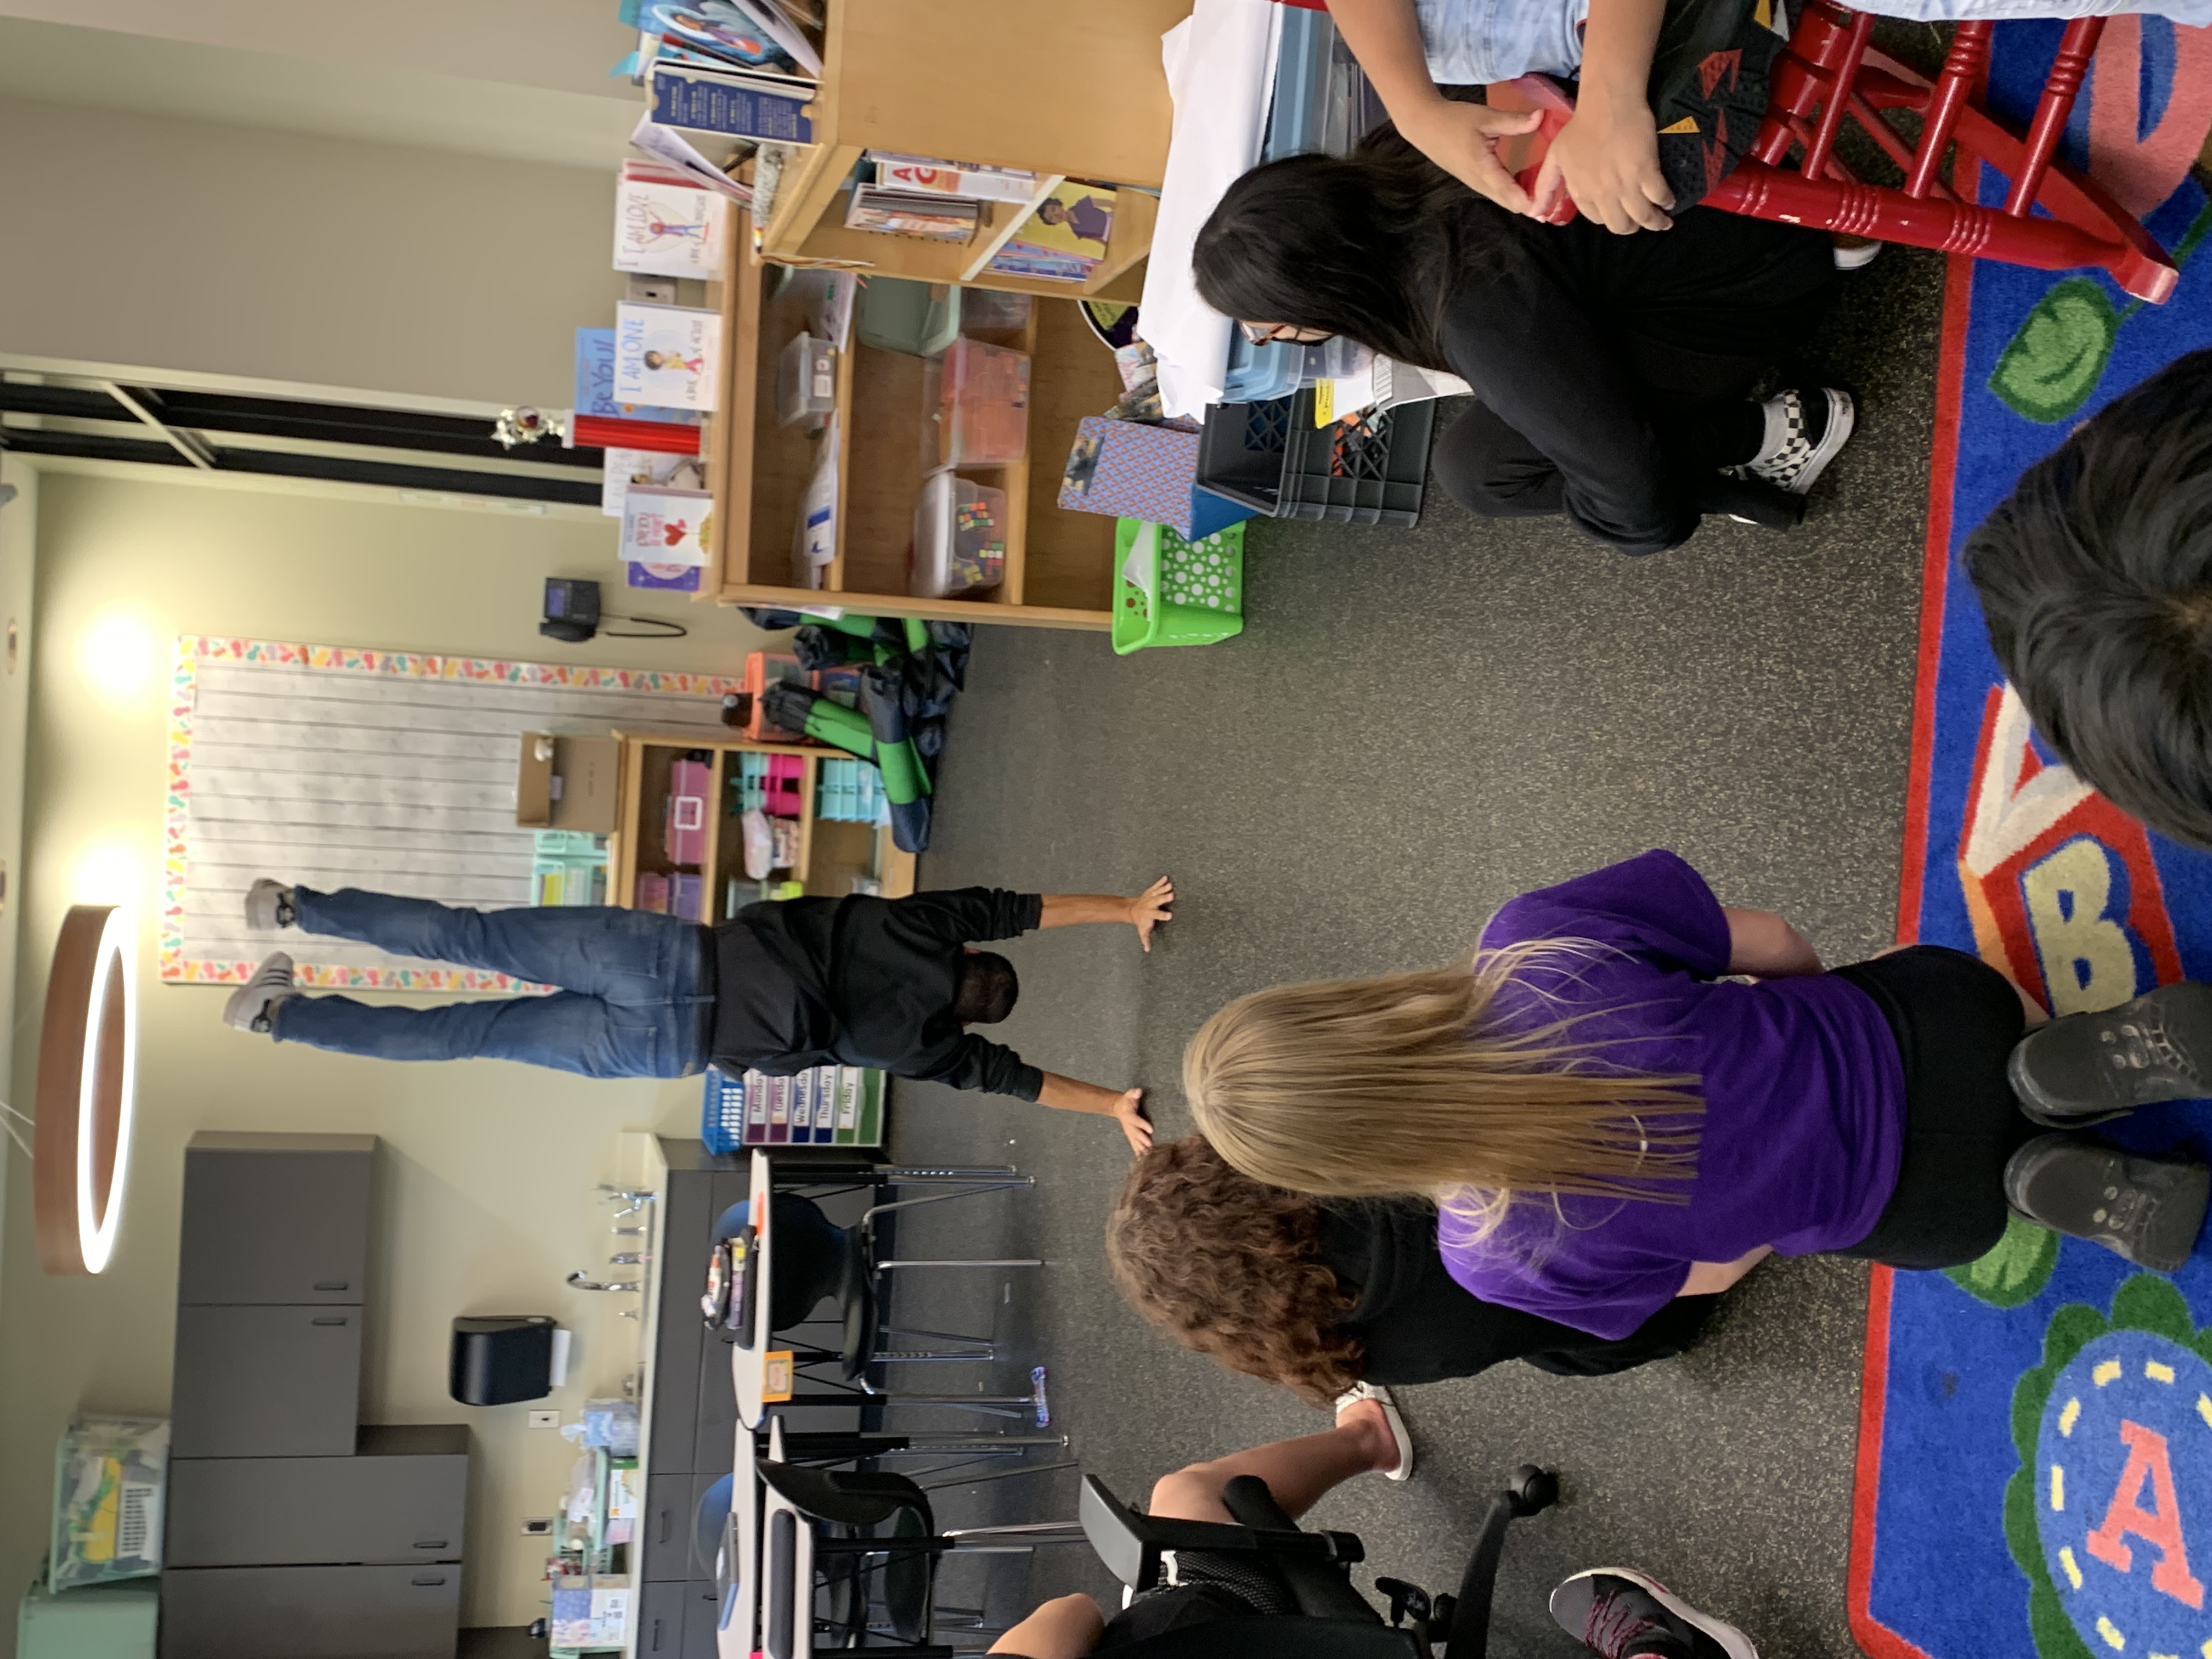 Mr Dropik doing a handstand in front of students who are sitting watching him in their classroom.